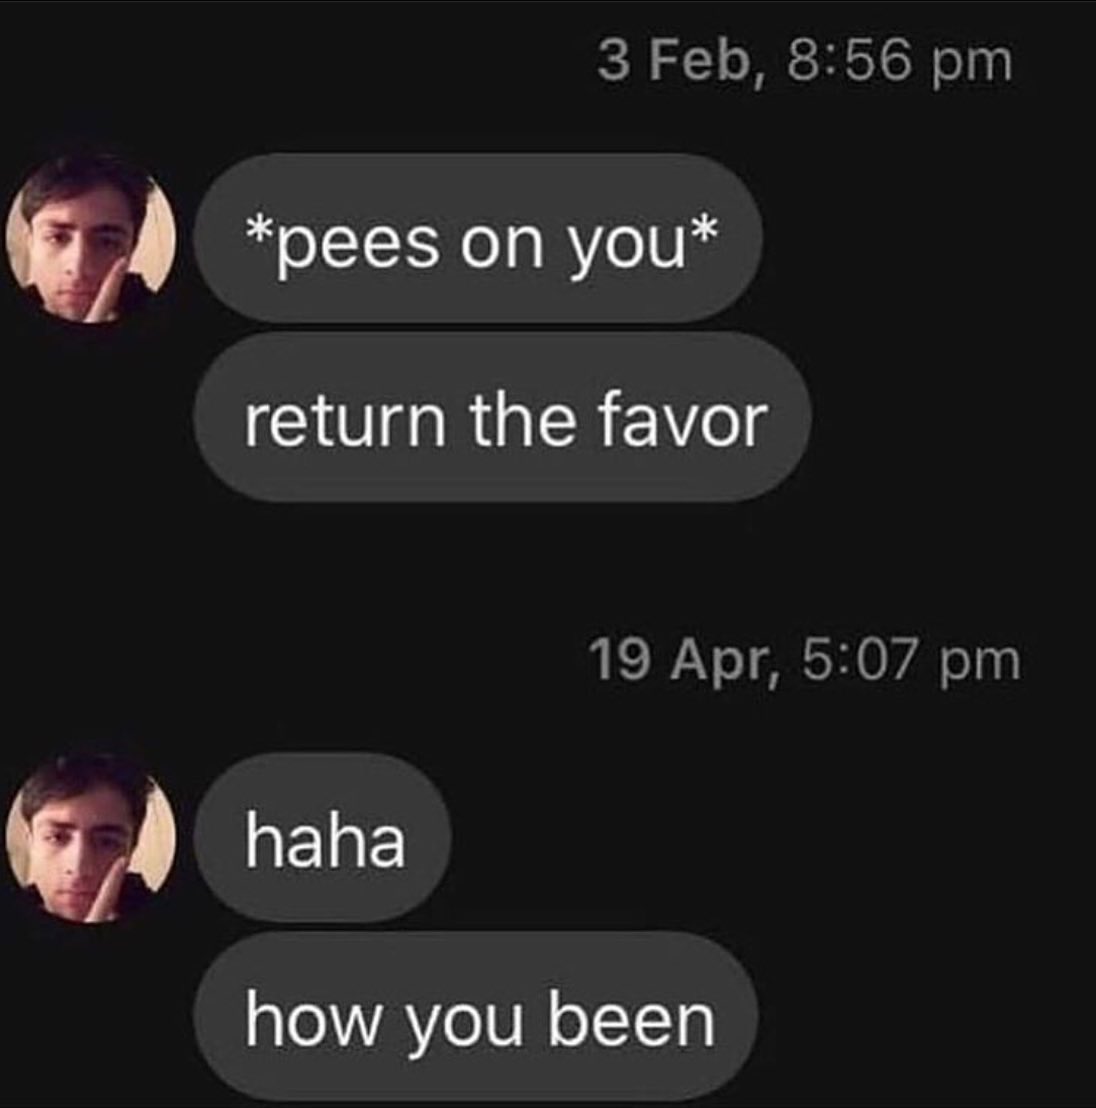 suspicious dms from twitter - pees on you return the favor - 3 Feb, pees on you return the favor haha 19 Apr, how you been